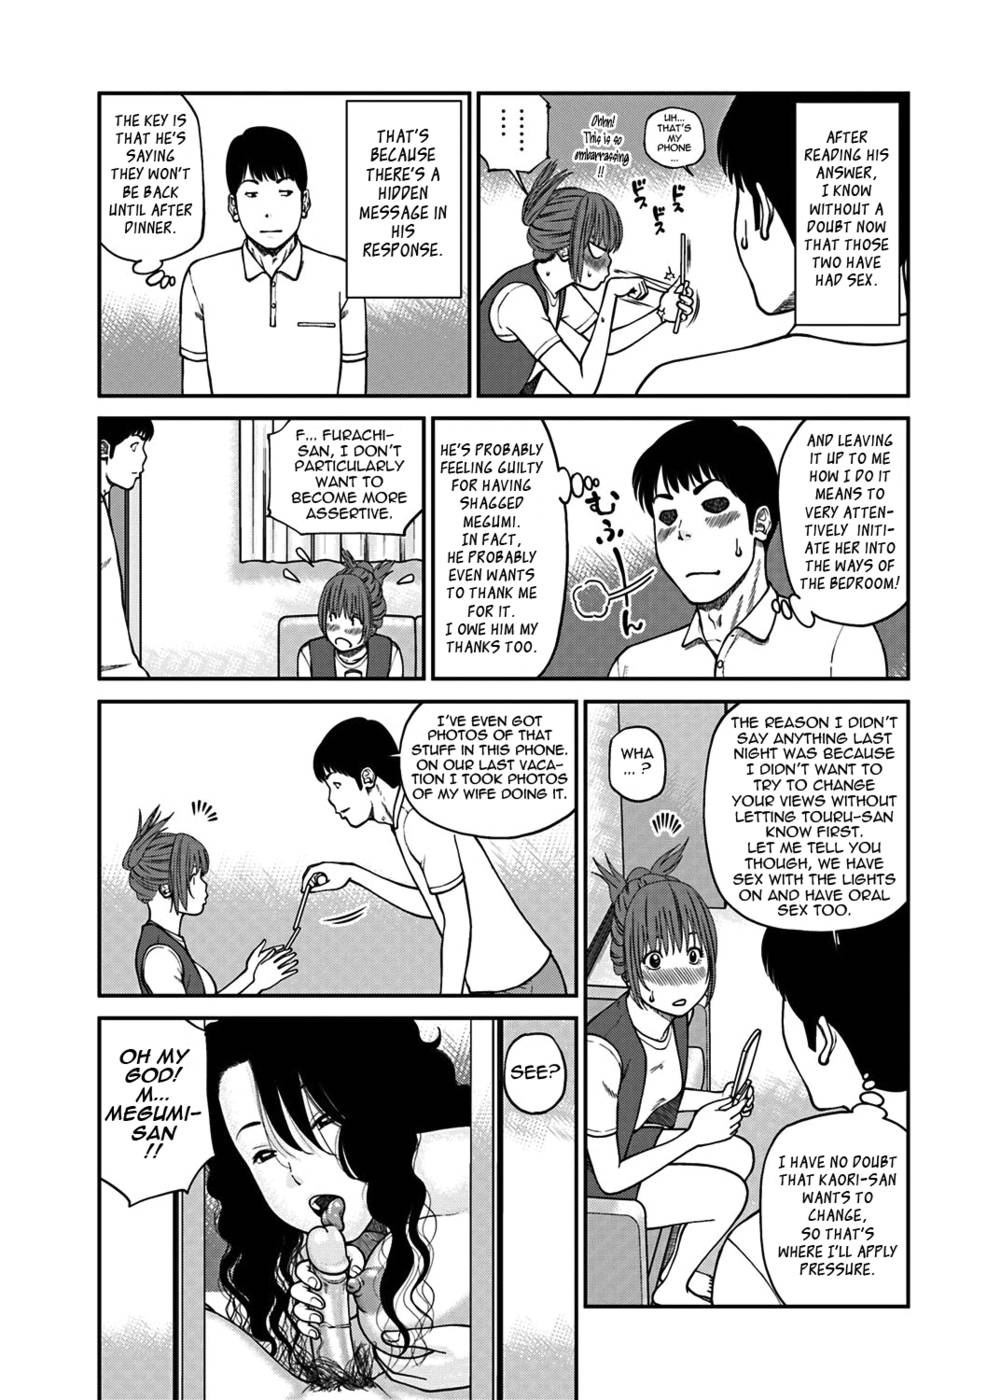 33 Year Old Unsatisfied Wife-Chapter 3-Spouse Swapping-Second Day-Hentai Manga Hentai Comic image